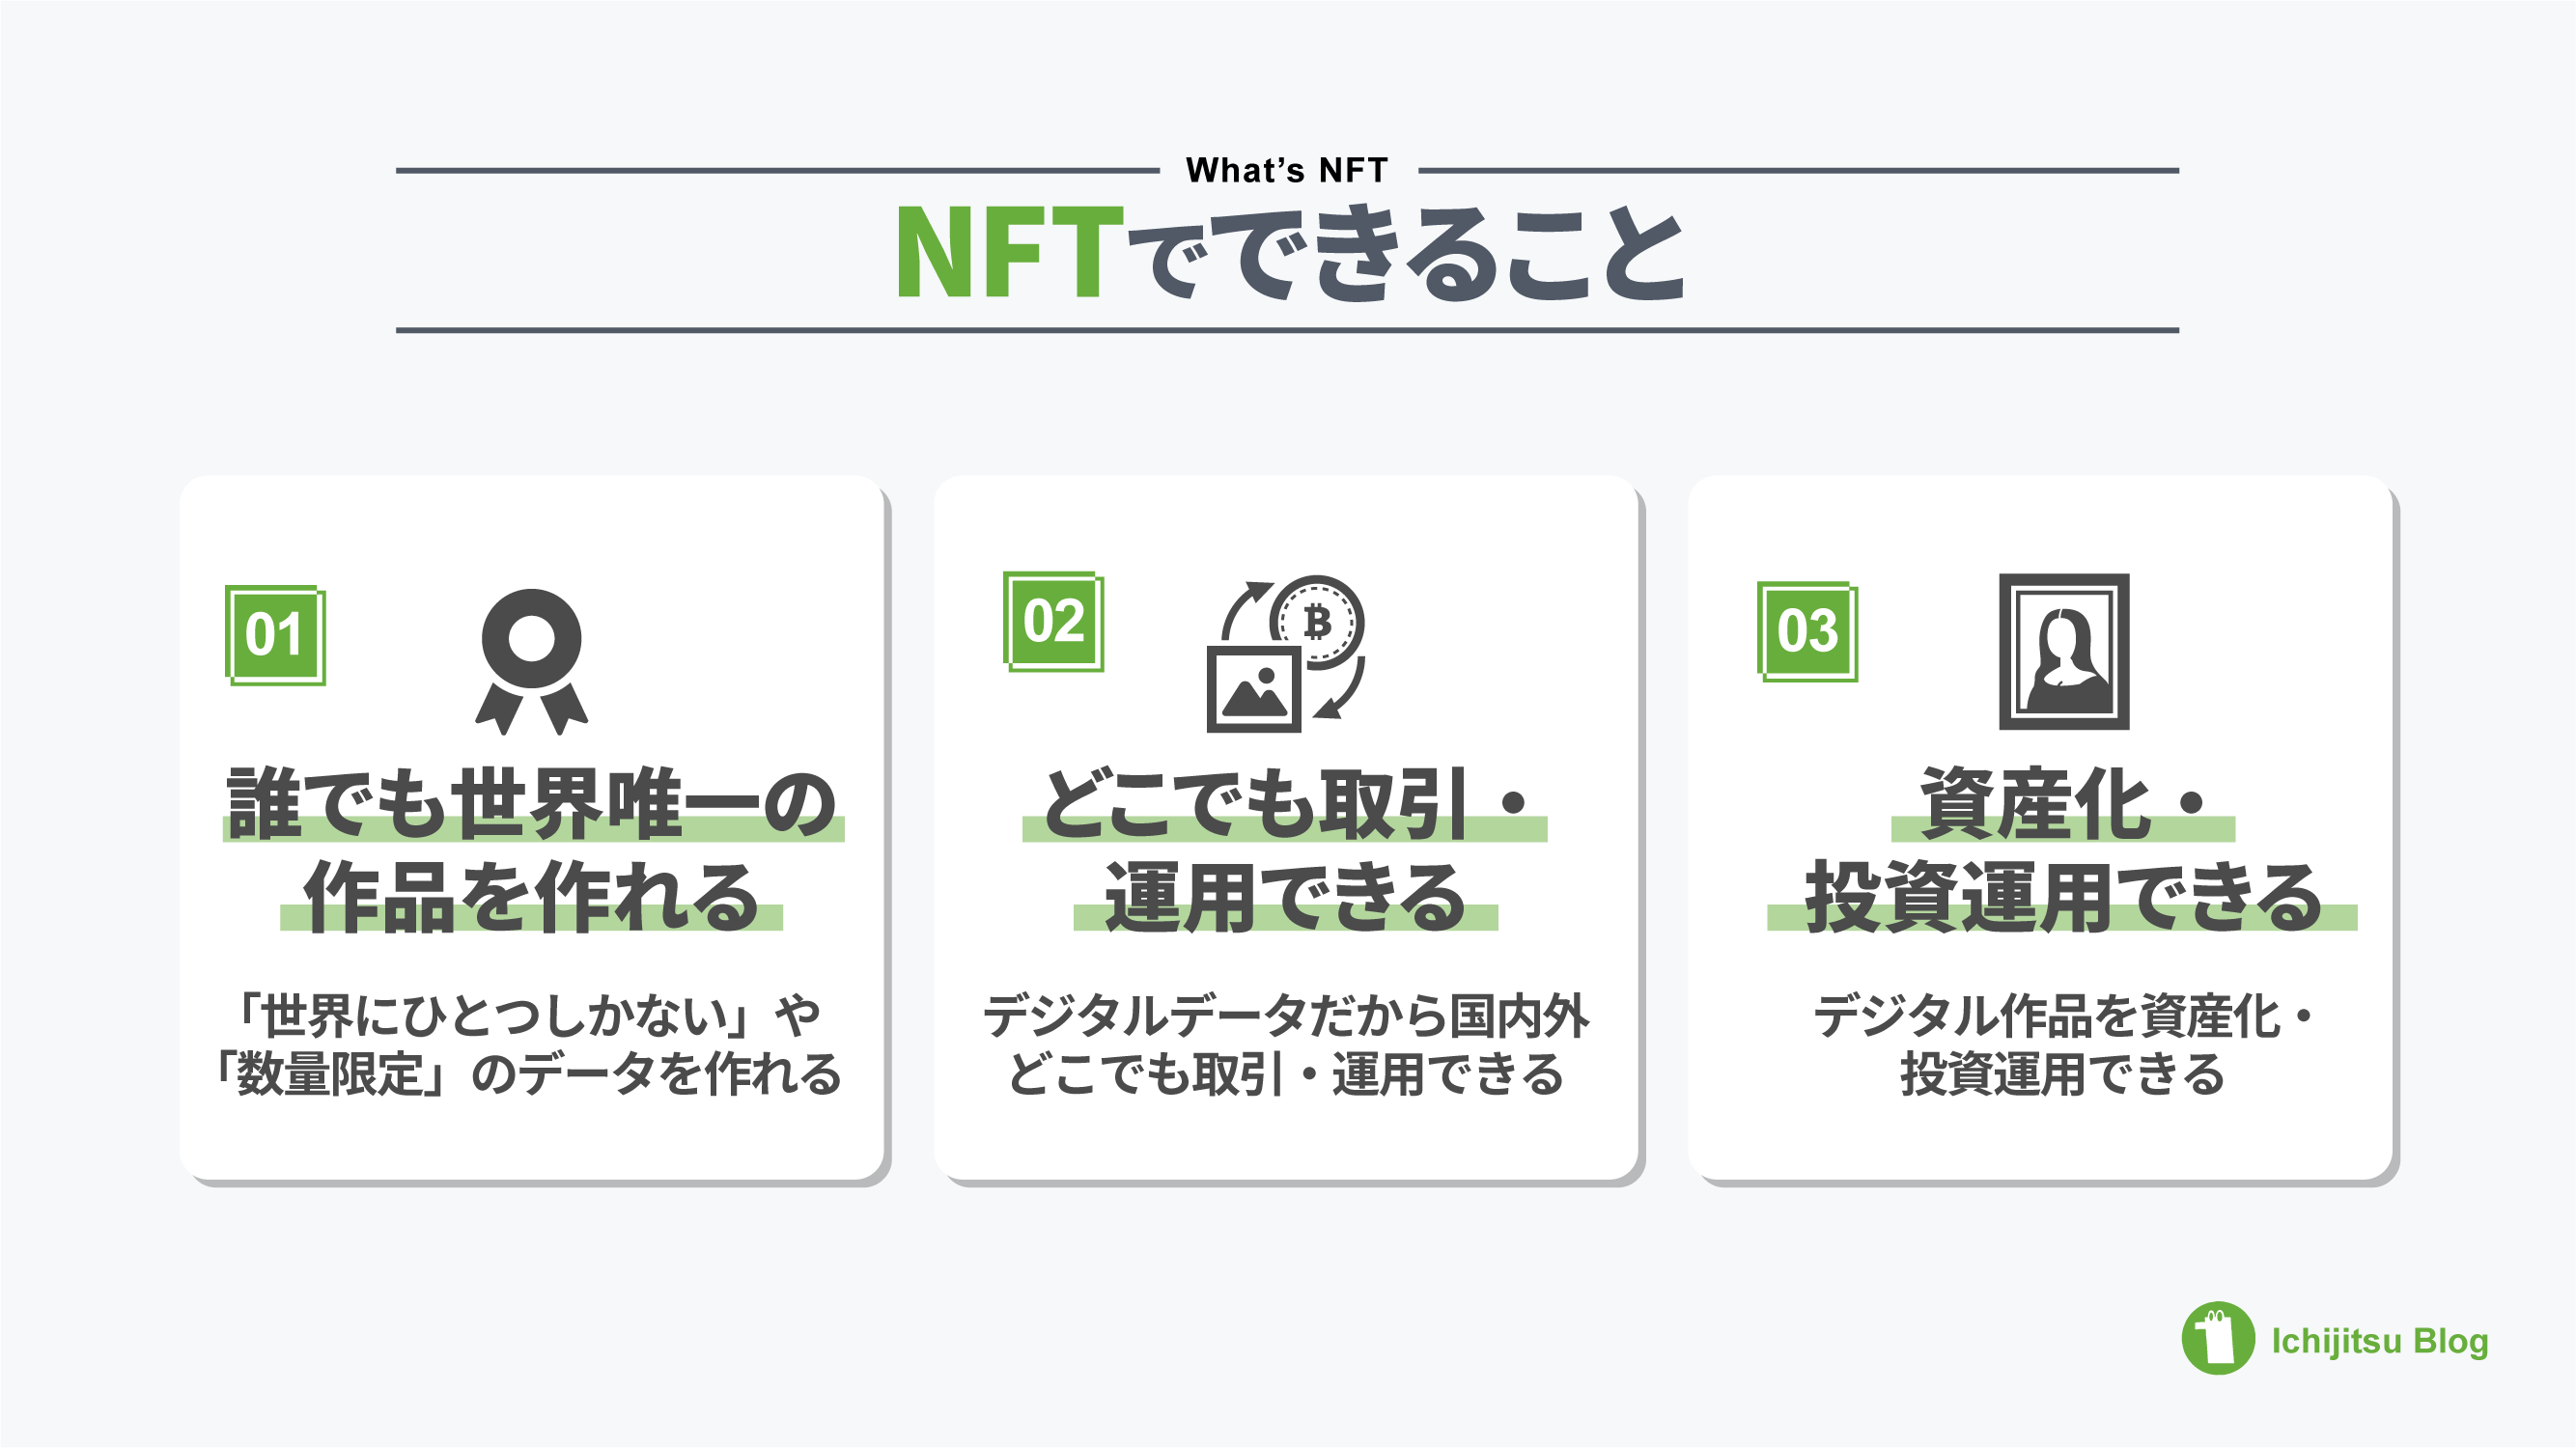 Easy-to-understand illustrations of what can be done with NFT for beginners